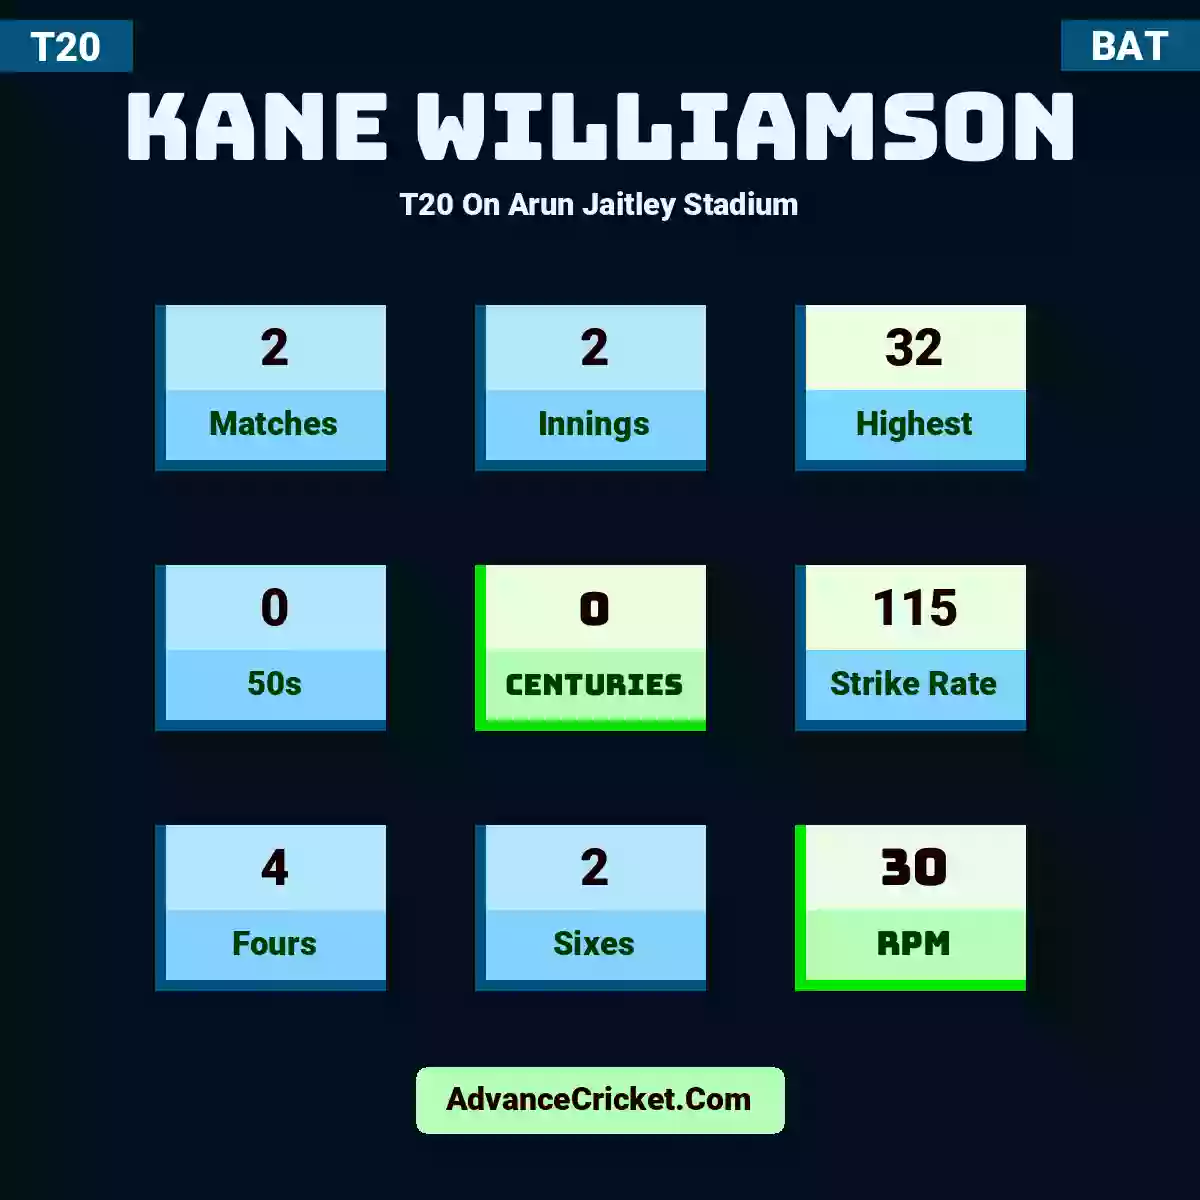 Kane Williamson T20  On Arun Jaitley Stadium, Kane Williamson played 2 matches, scored 32 runs as highest, 0 half-centuries, and 0 centuries, with a strike rate of 115. K.Williamson hit 4 fours and 2 sixes, with an RPM of 30.